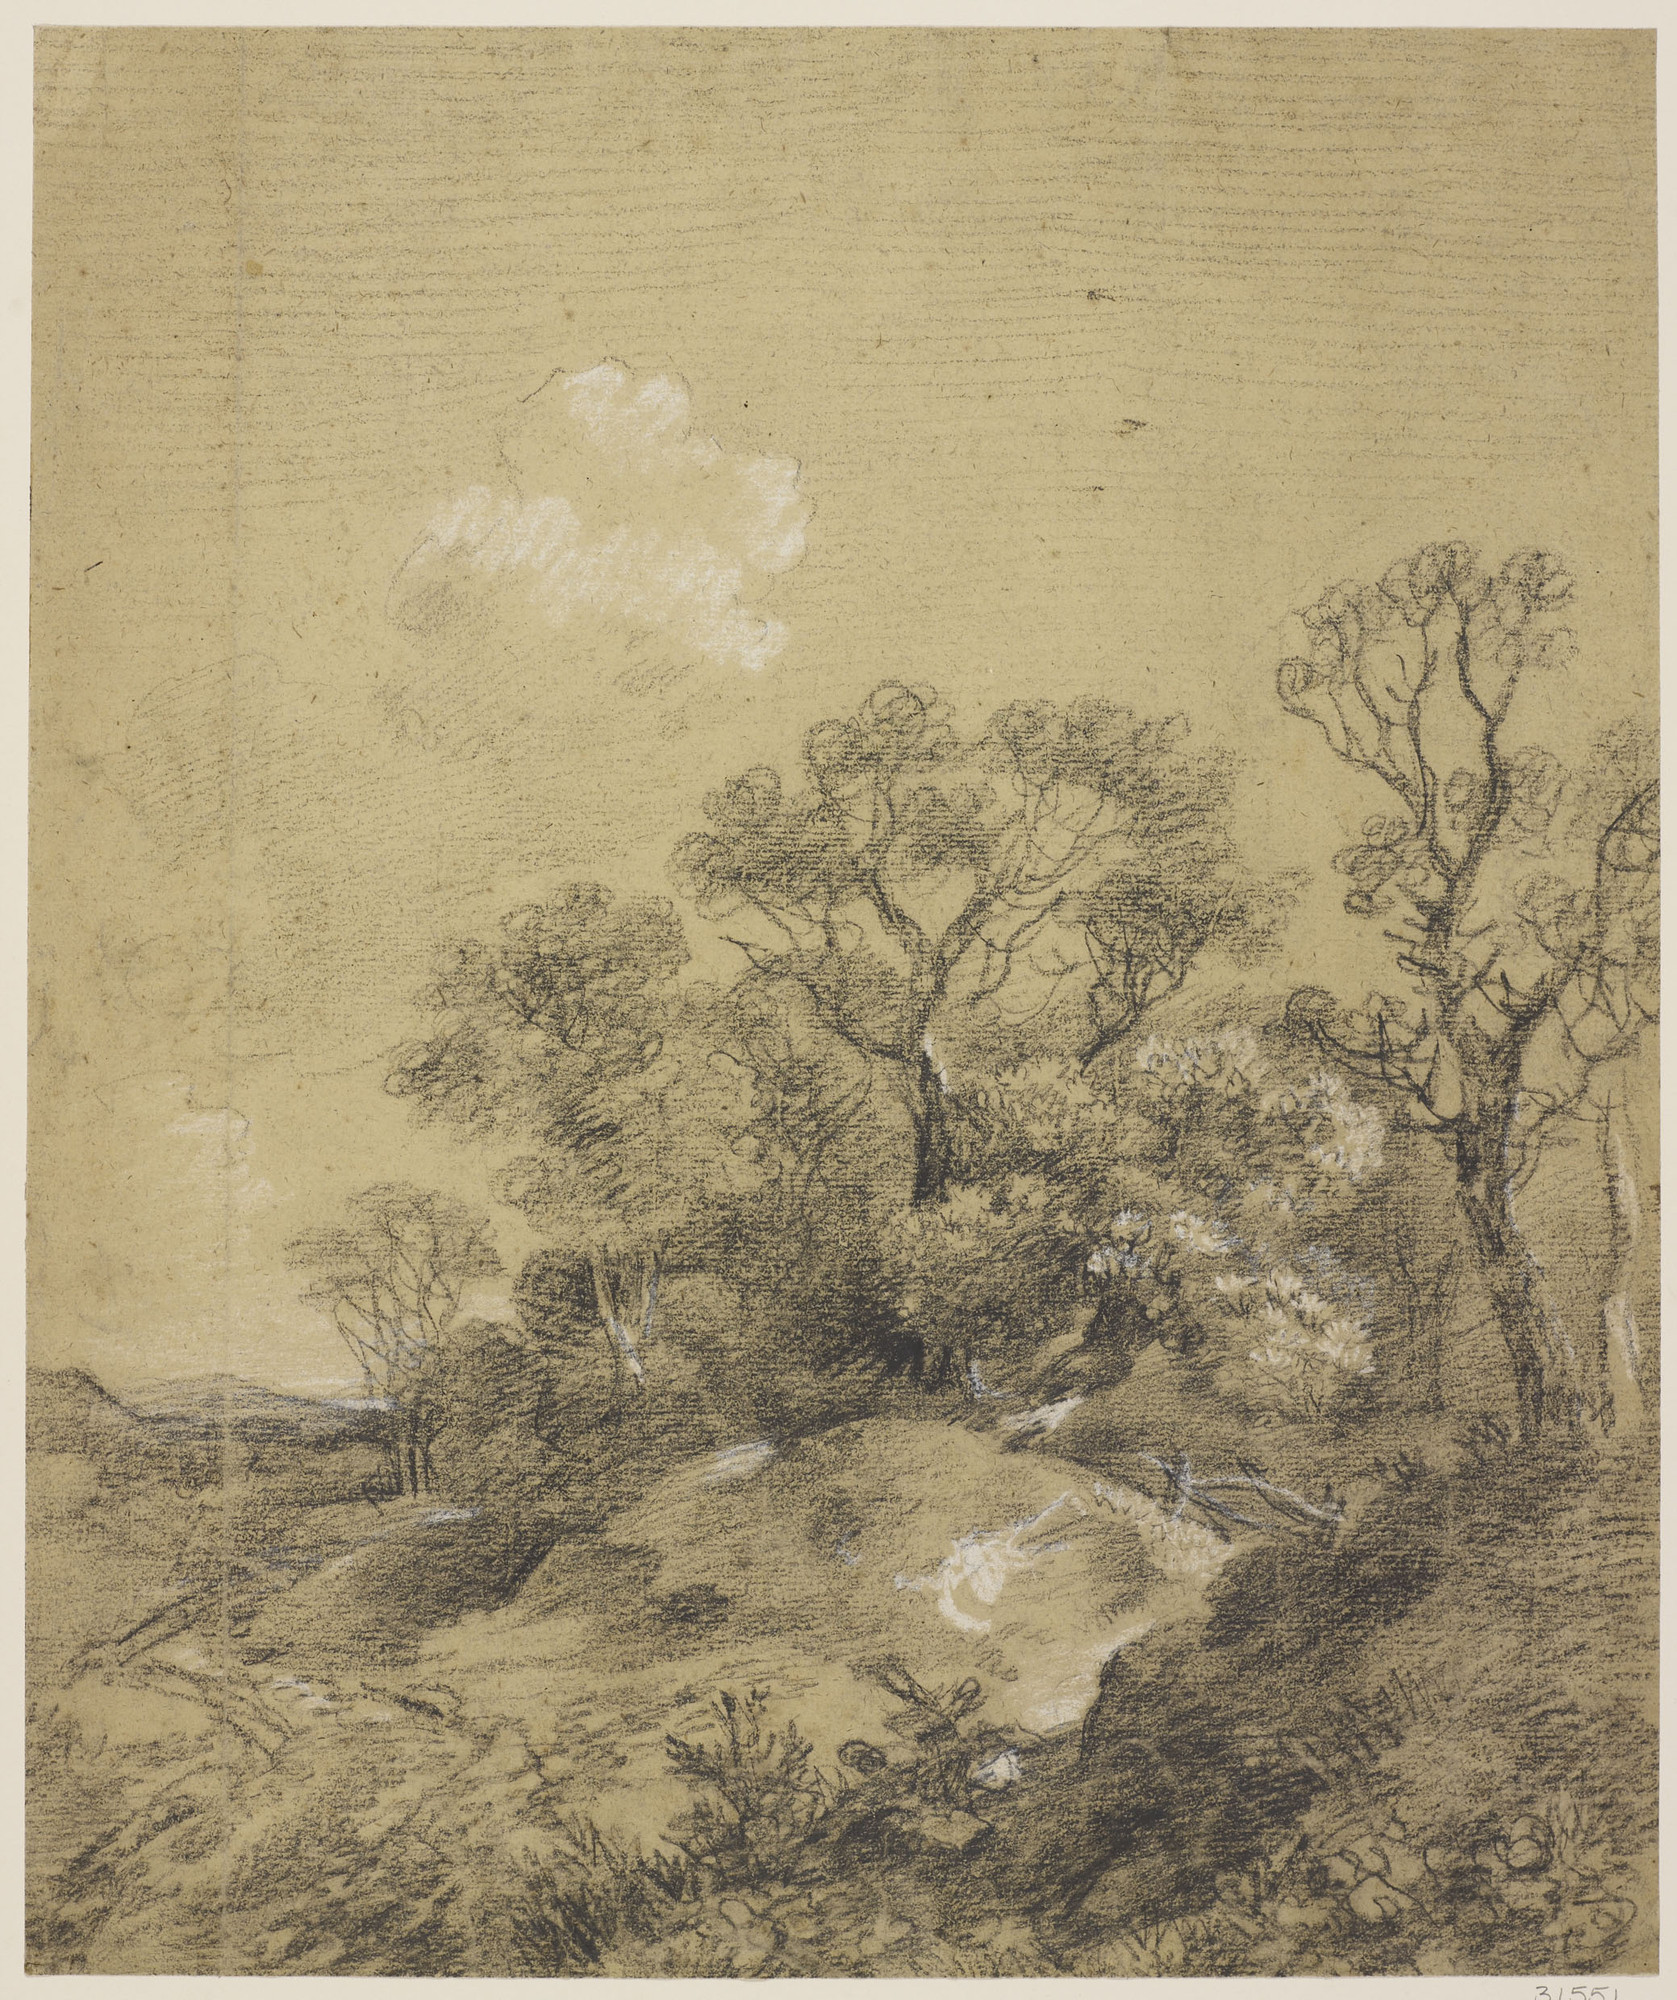 A&nbsp;black and white chalk drawing of a landscape&nbsp;with hillock in the middle ground centre, topped with trees. Path to left. Paper is French and watermarked 1748 (date altered on mould from 1742).